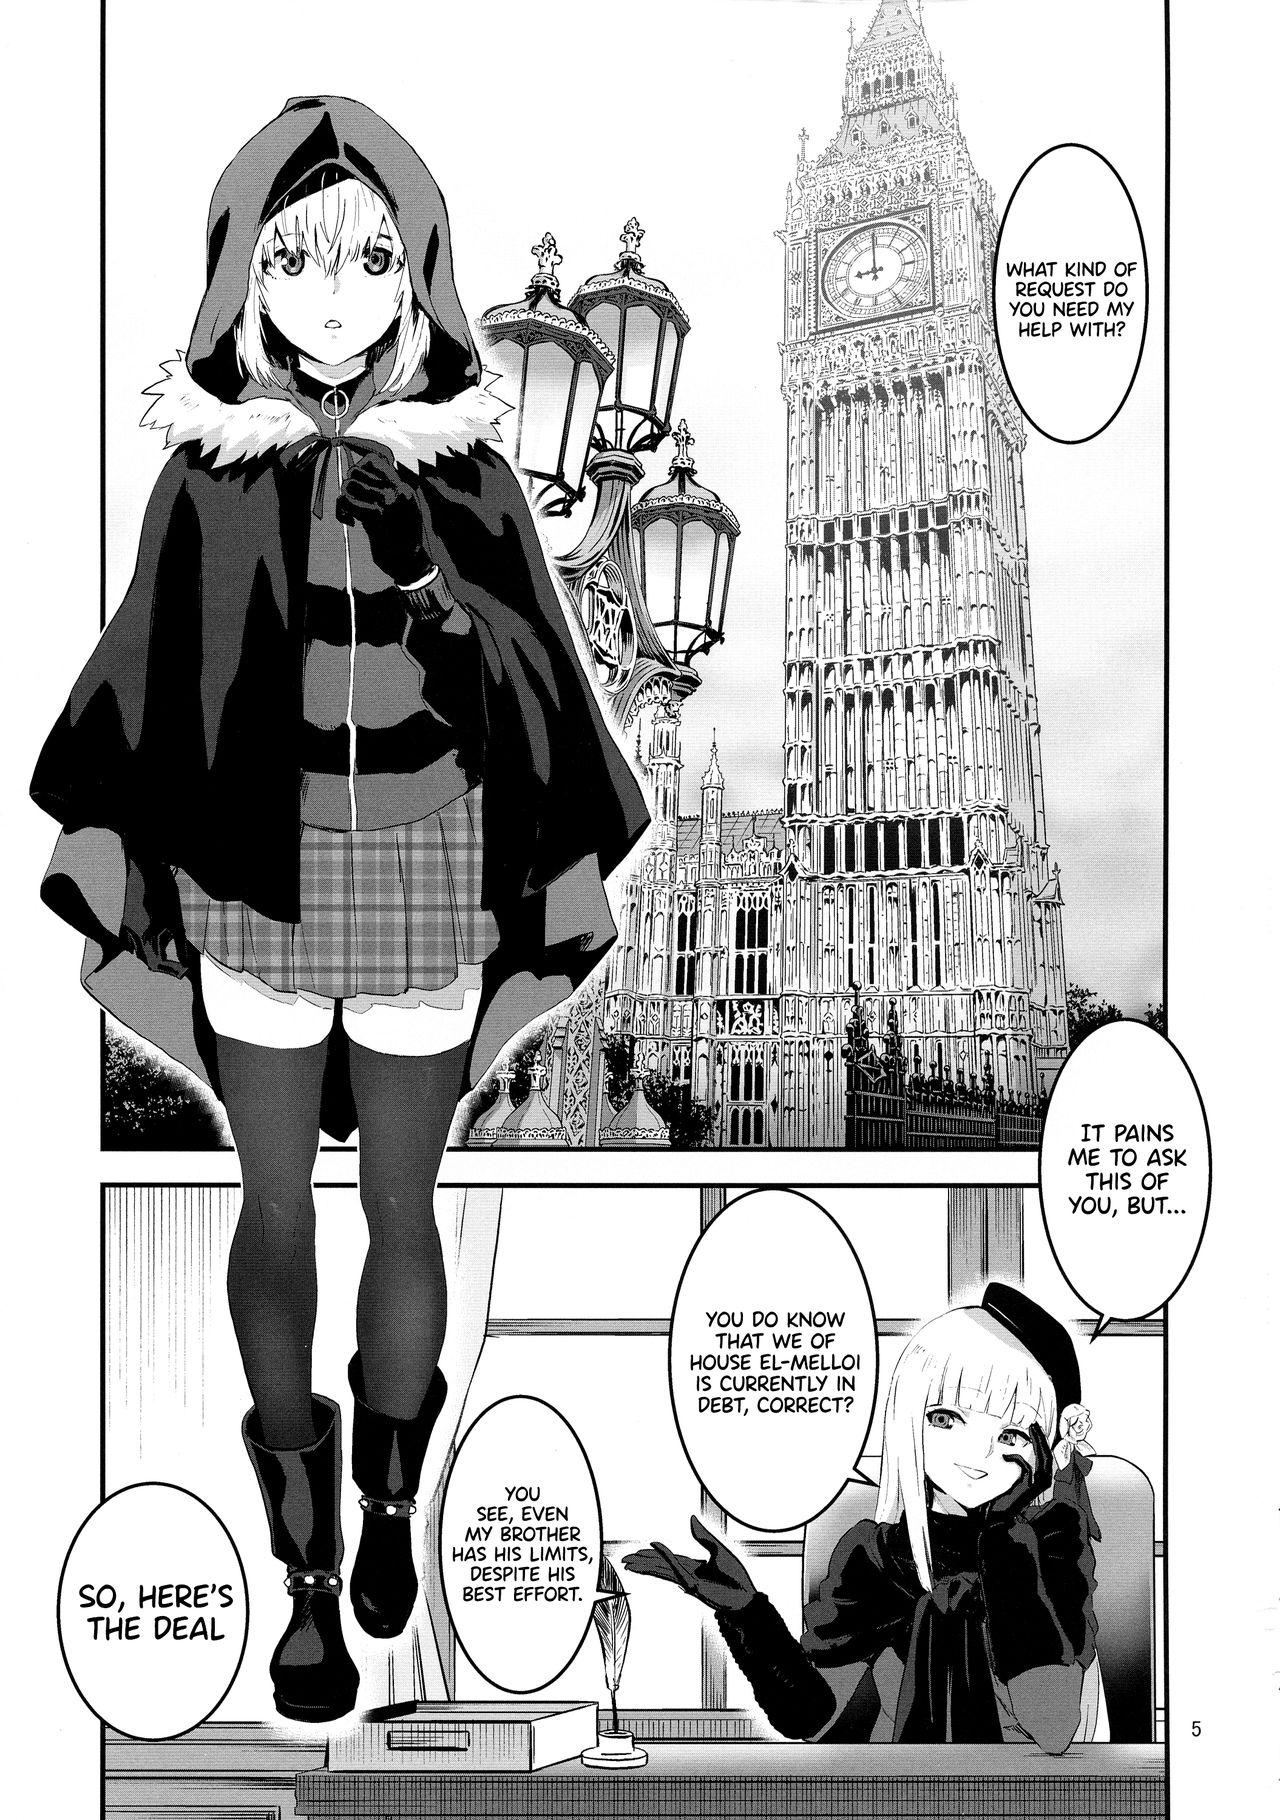 Fucking Sex Taking Advantage of Gray-chan Weakness, We Graduated from our Virginity. - Lord el-melloi ii sei no jikenbo Bj - Page 5